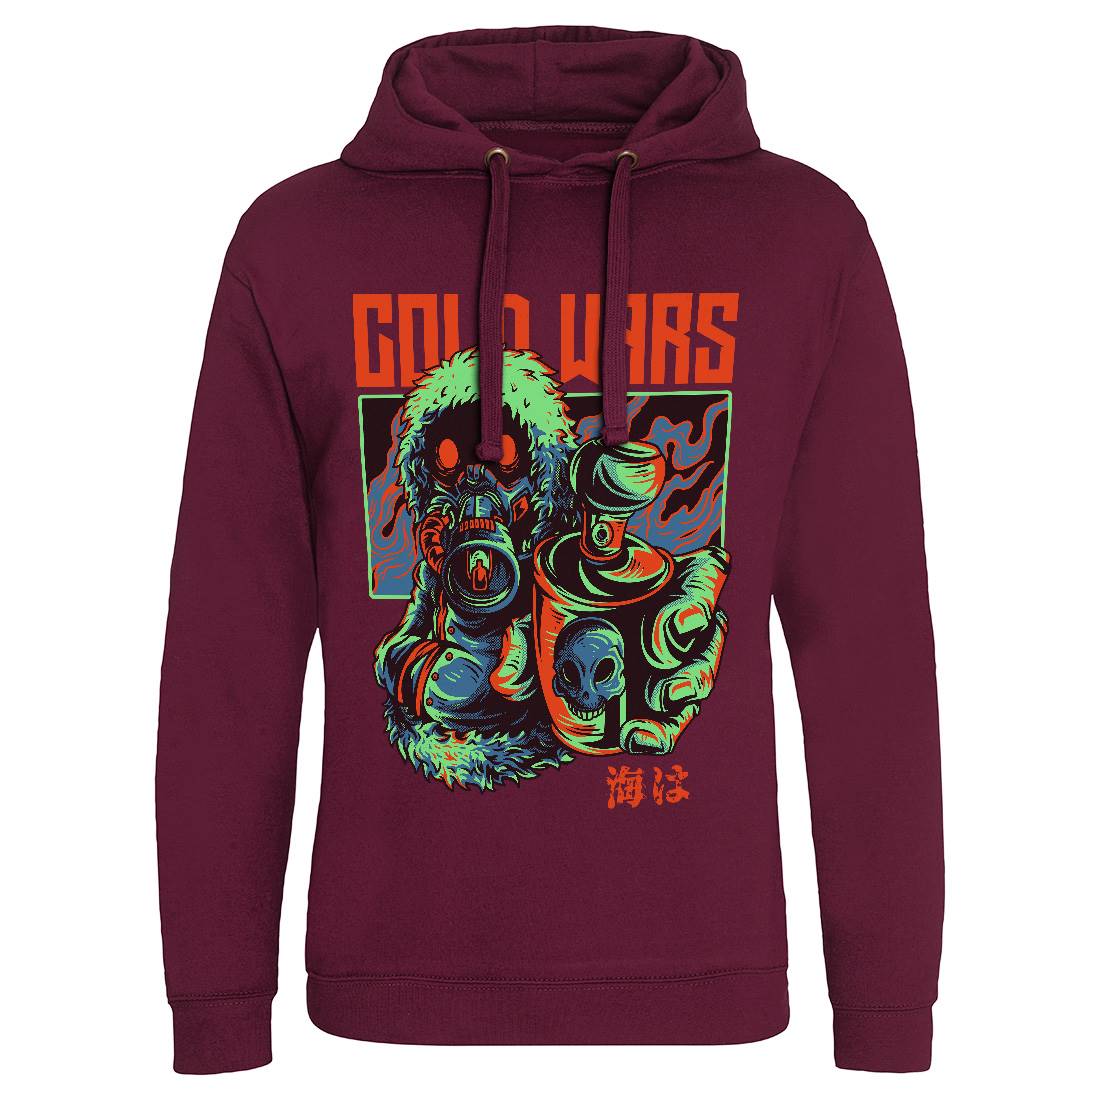 Cold Wars Mens Hoodie Without Pocket Graffiti D727